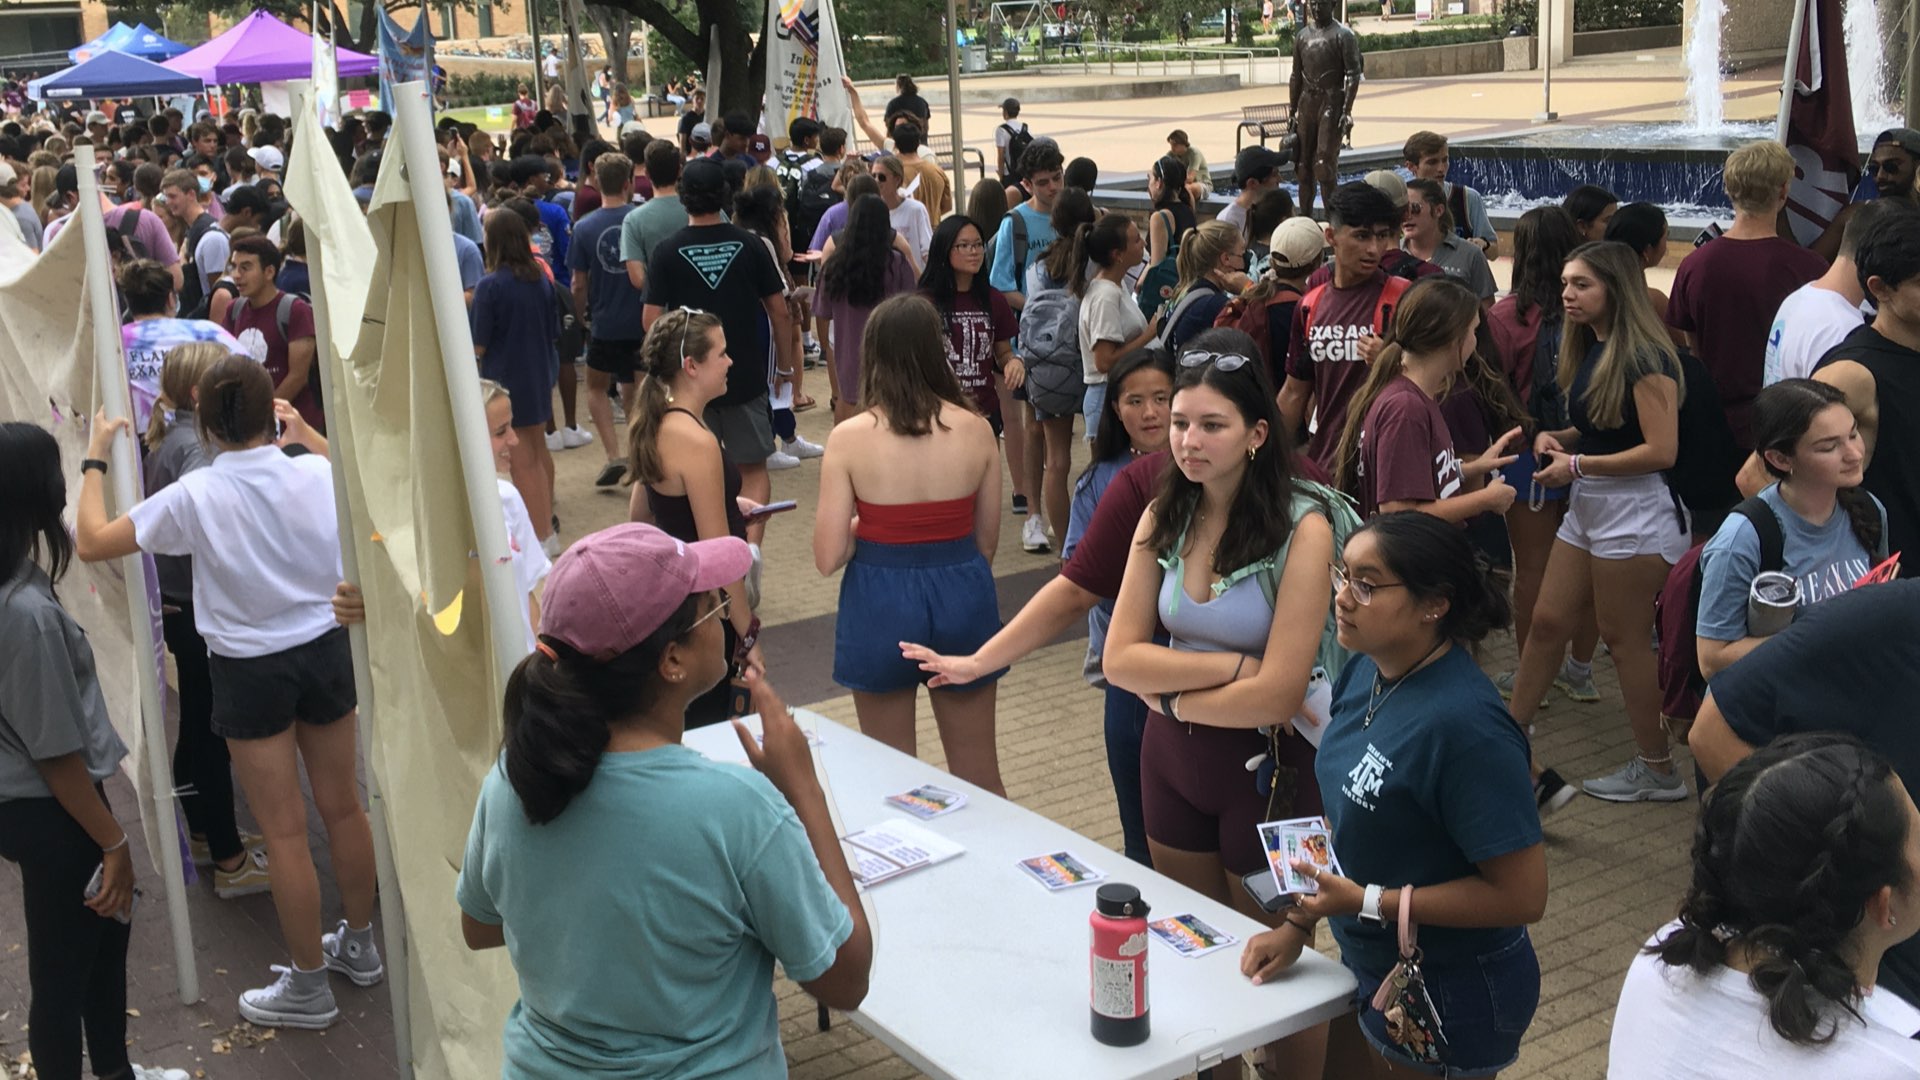 Students getting information at FLO tables by Rudder Fountain